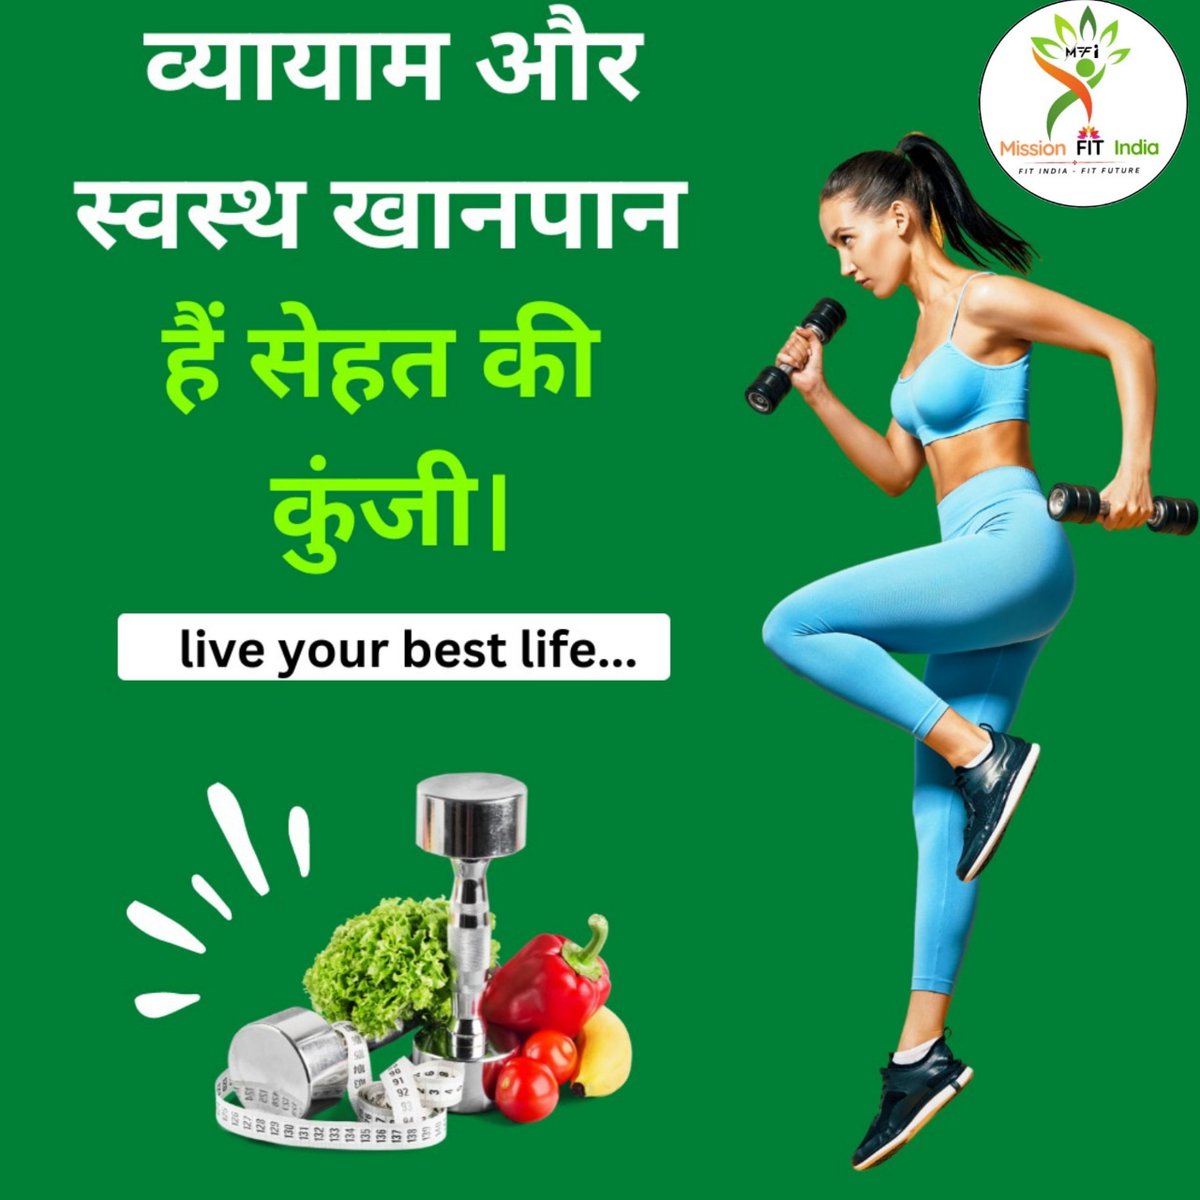 It's time to show your body some love through regular exercise. Invest in your health and well-being today. Are you ready to make the commitment? DM me +91-7665991345 𝐕𝐢𝐬𝐢𝐭: VikramSinghValera.in #exercise #fitness #workout #gym #health #motivation #fitnessmotivation